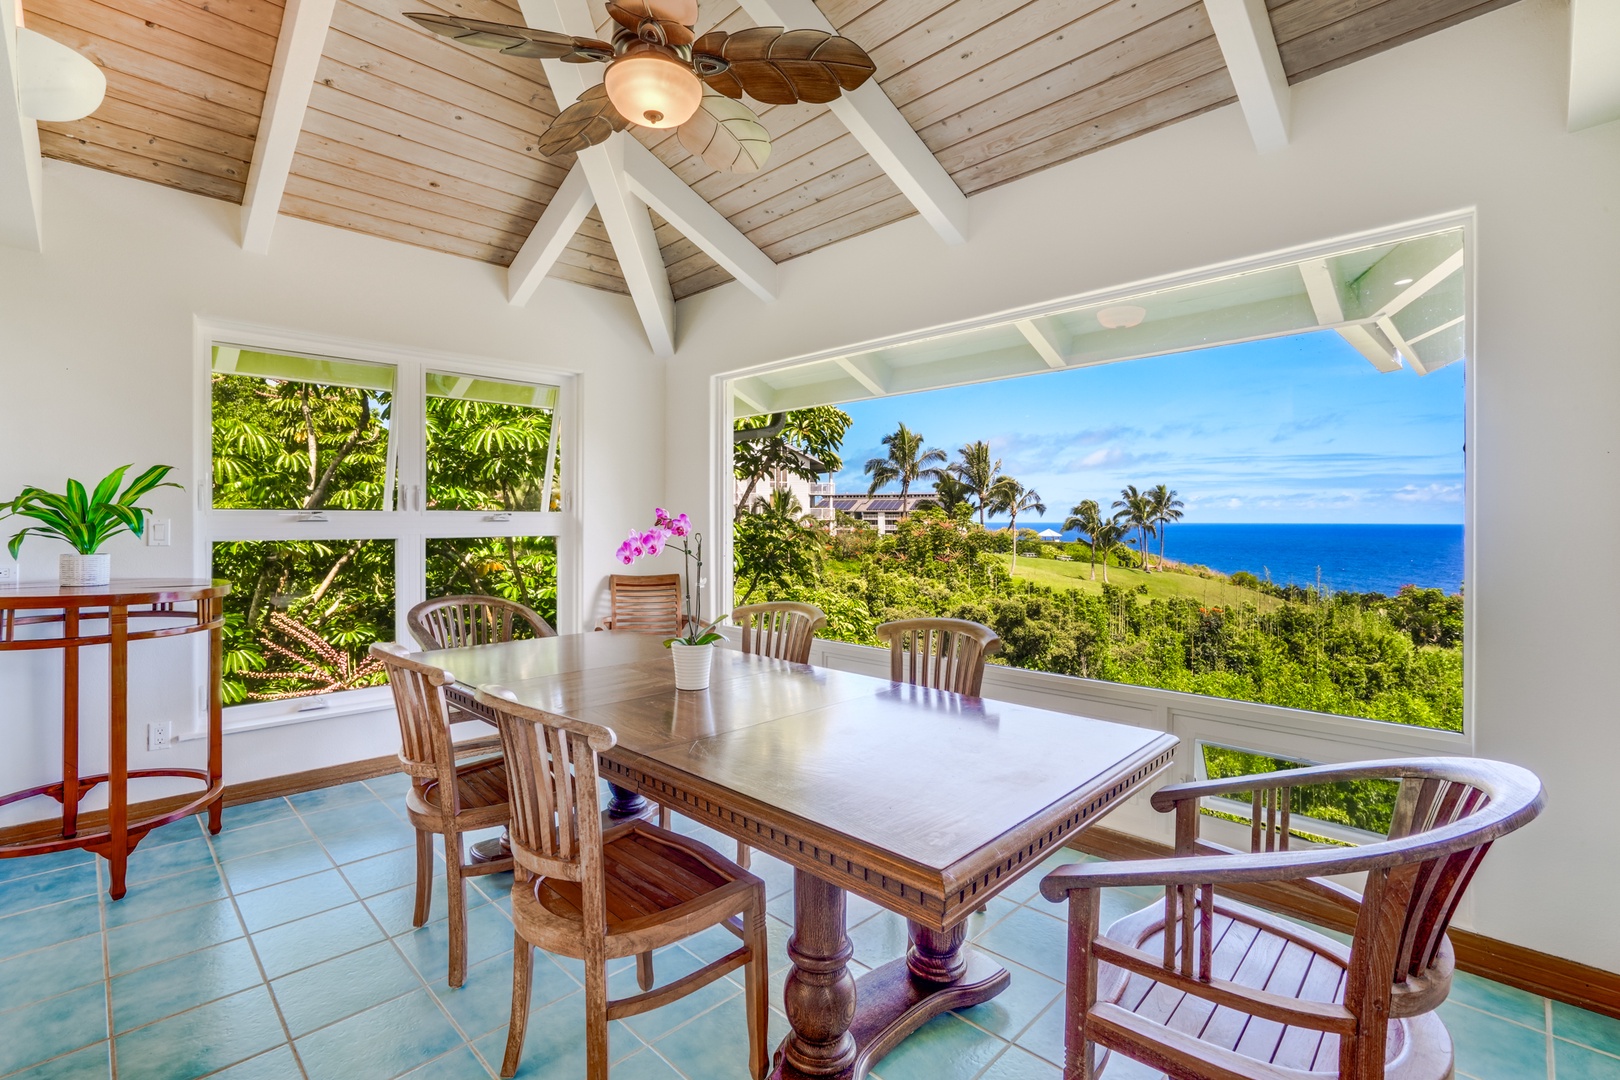 Princeville Vacation Rentals, Wai Lani - Feast your eyes and appetite alike as you dine amidst breathtaking panoramic views.